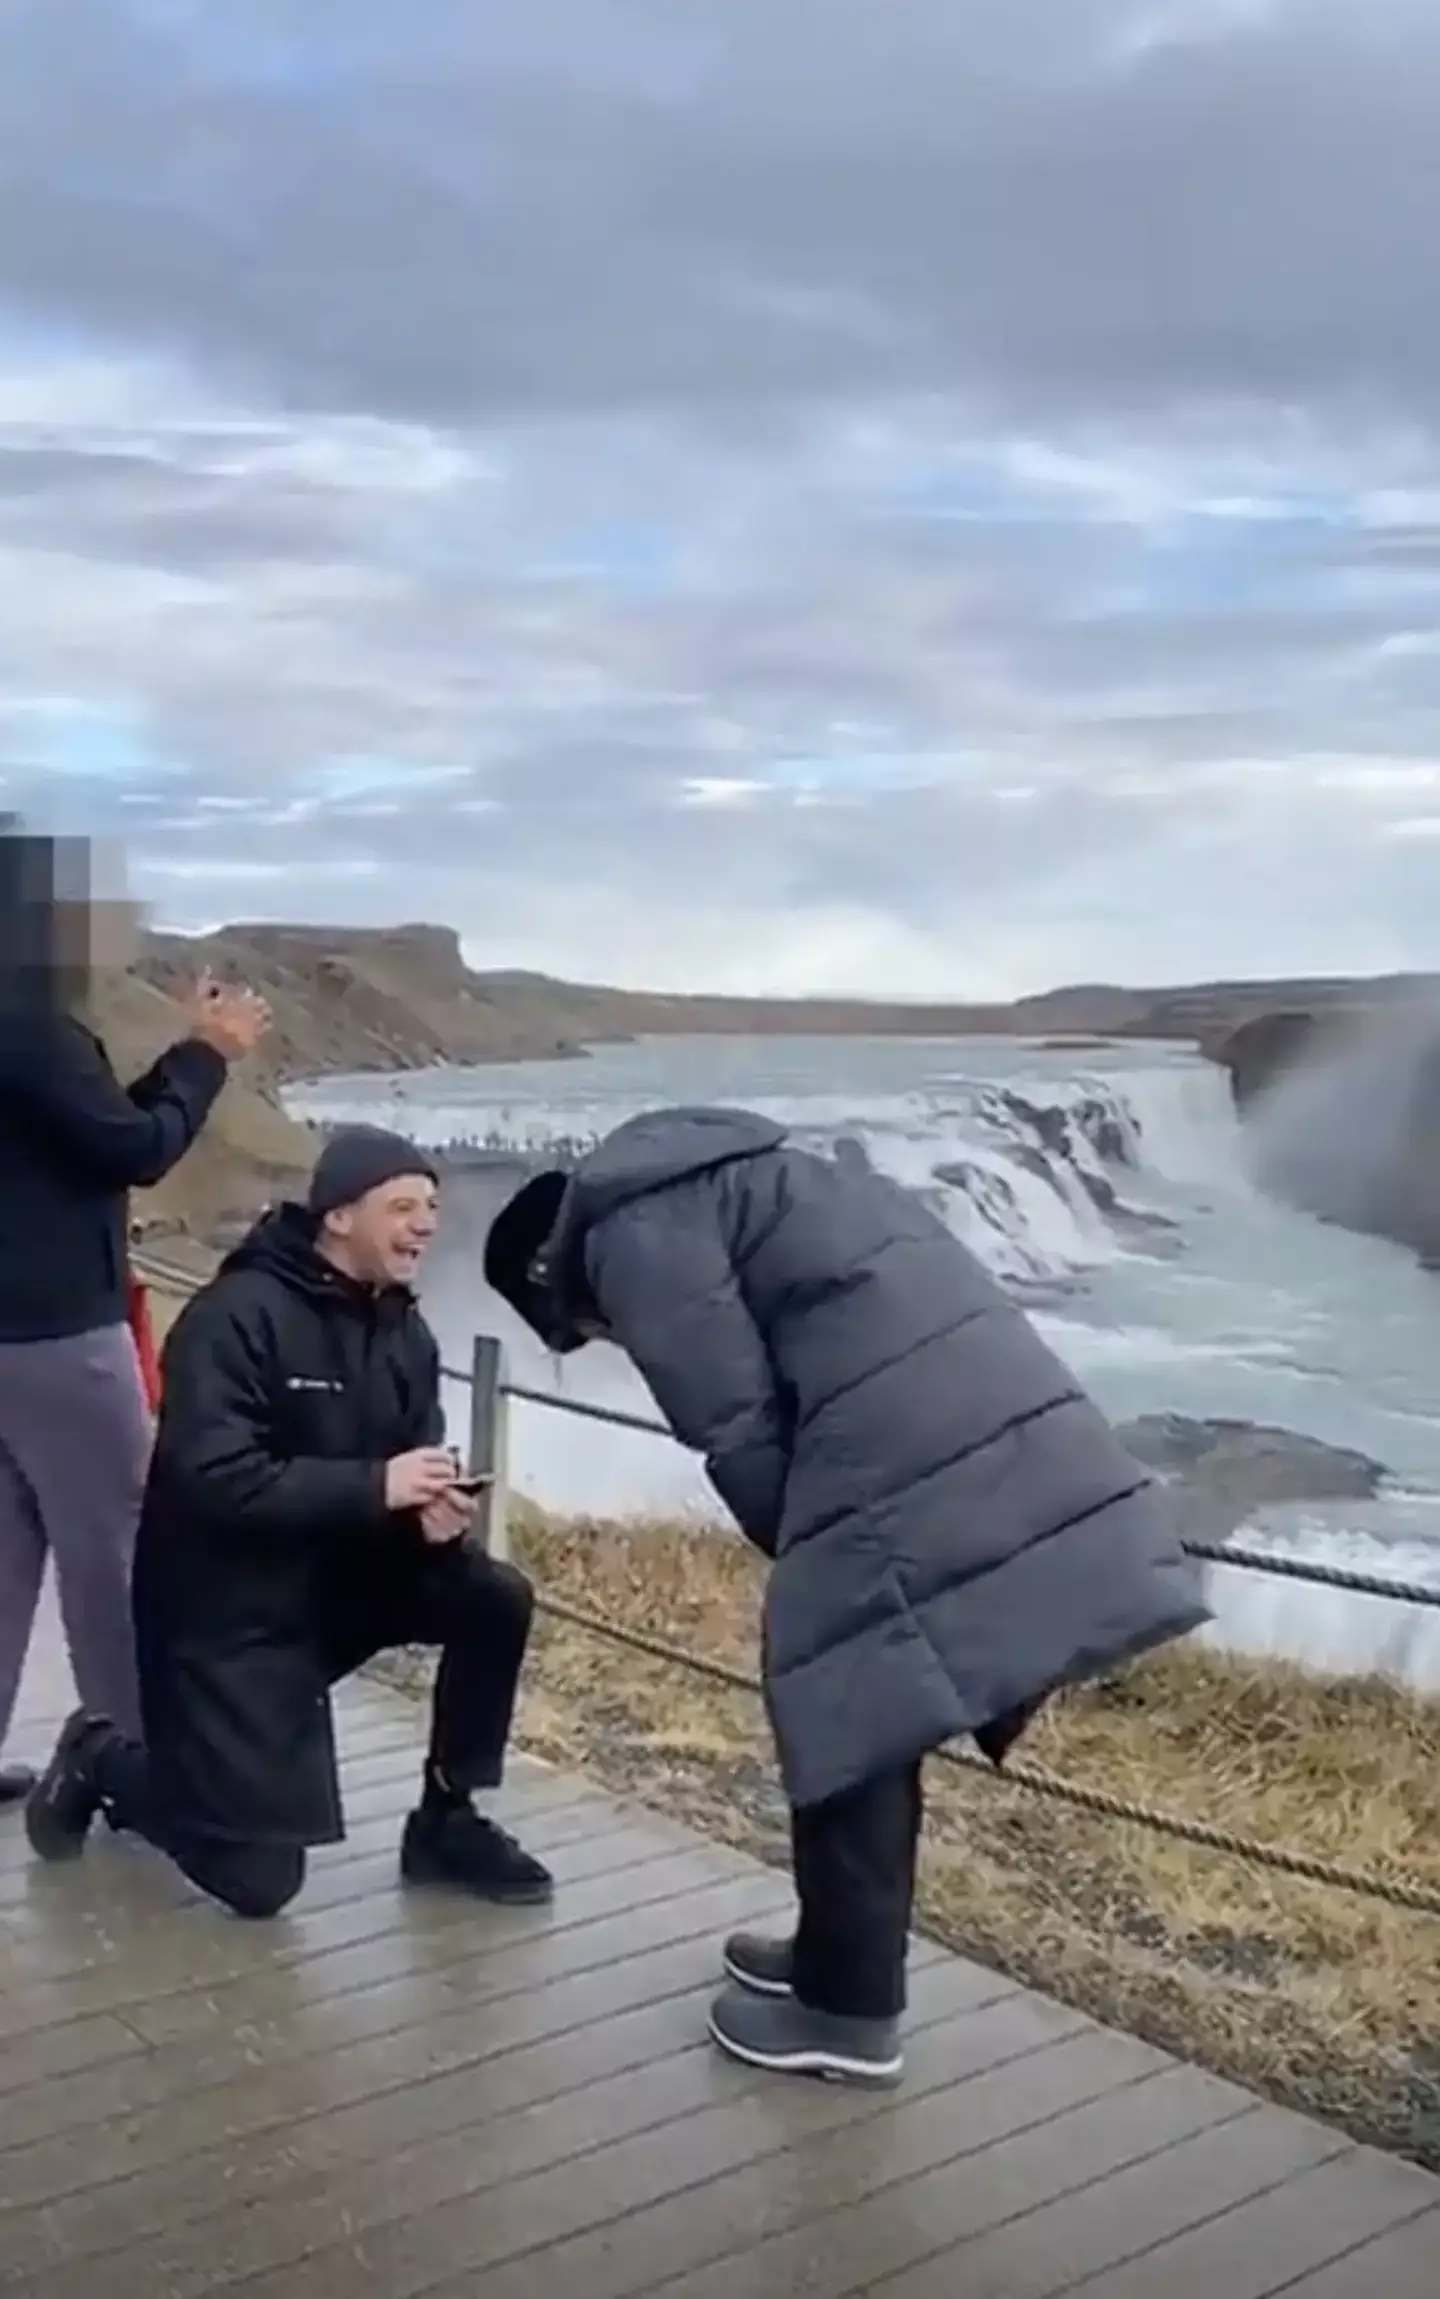 A tourist, seemingly unwittingly, crashed the proposal.